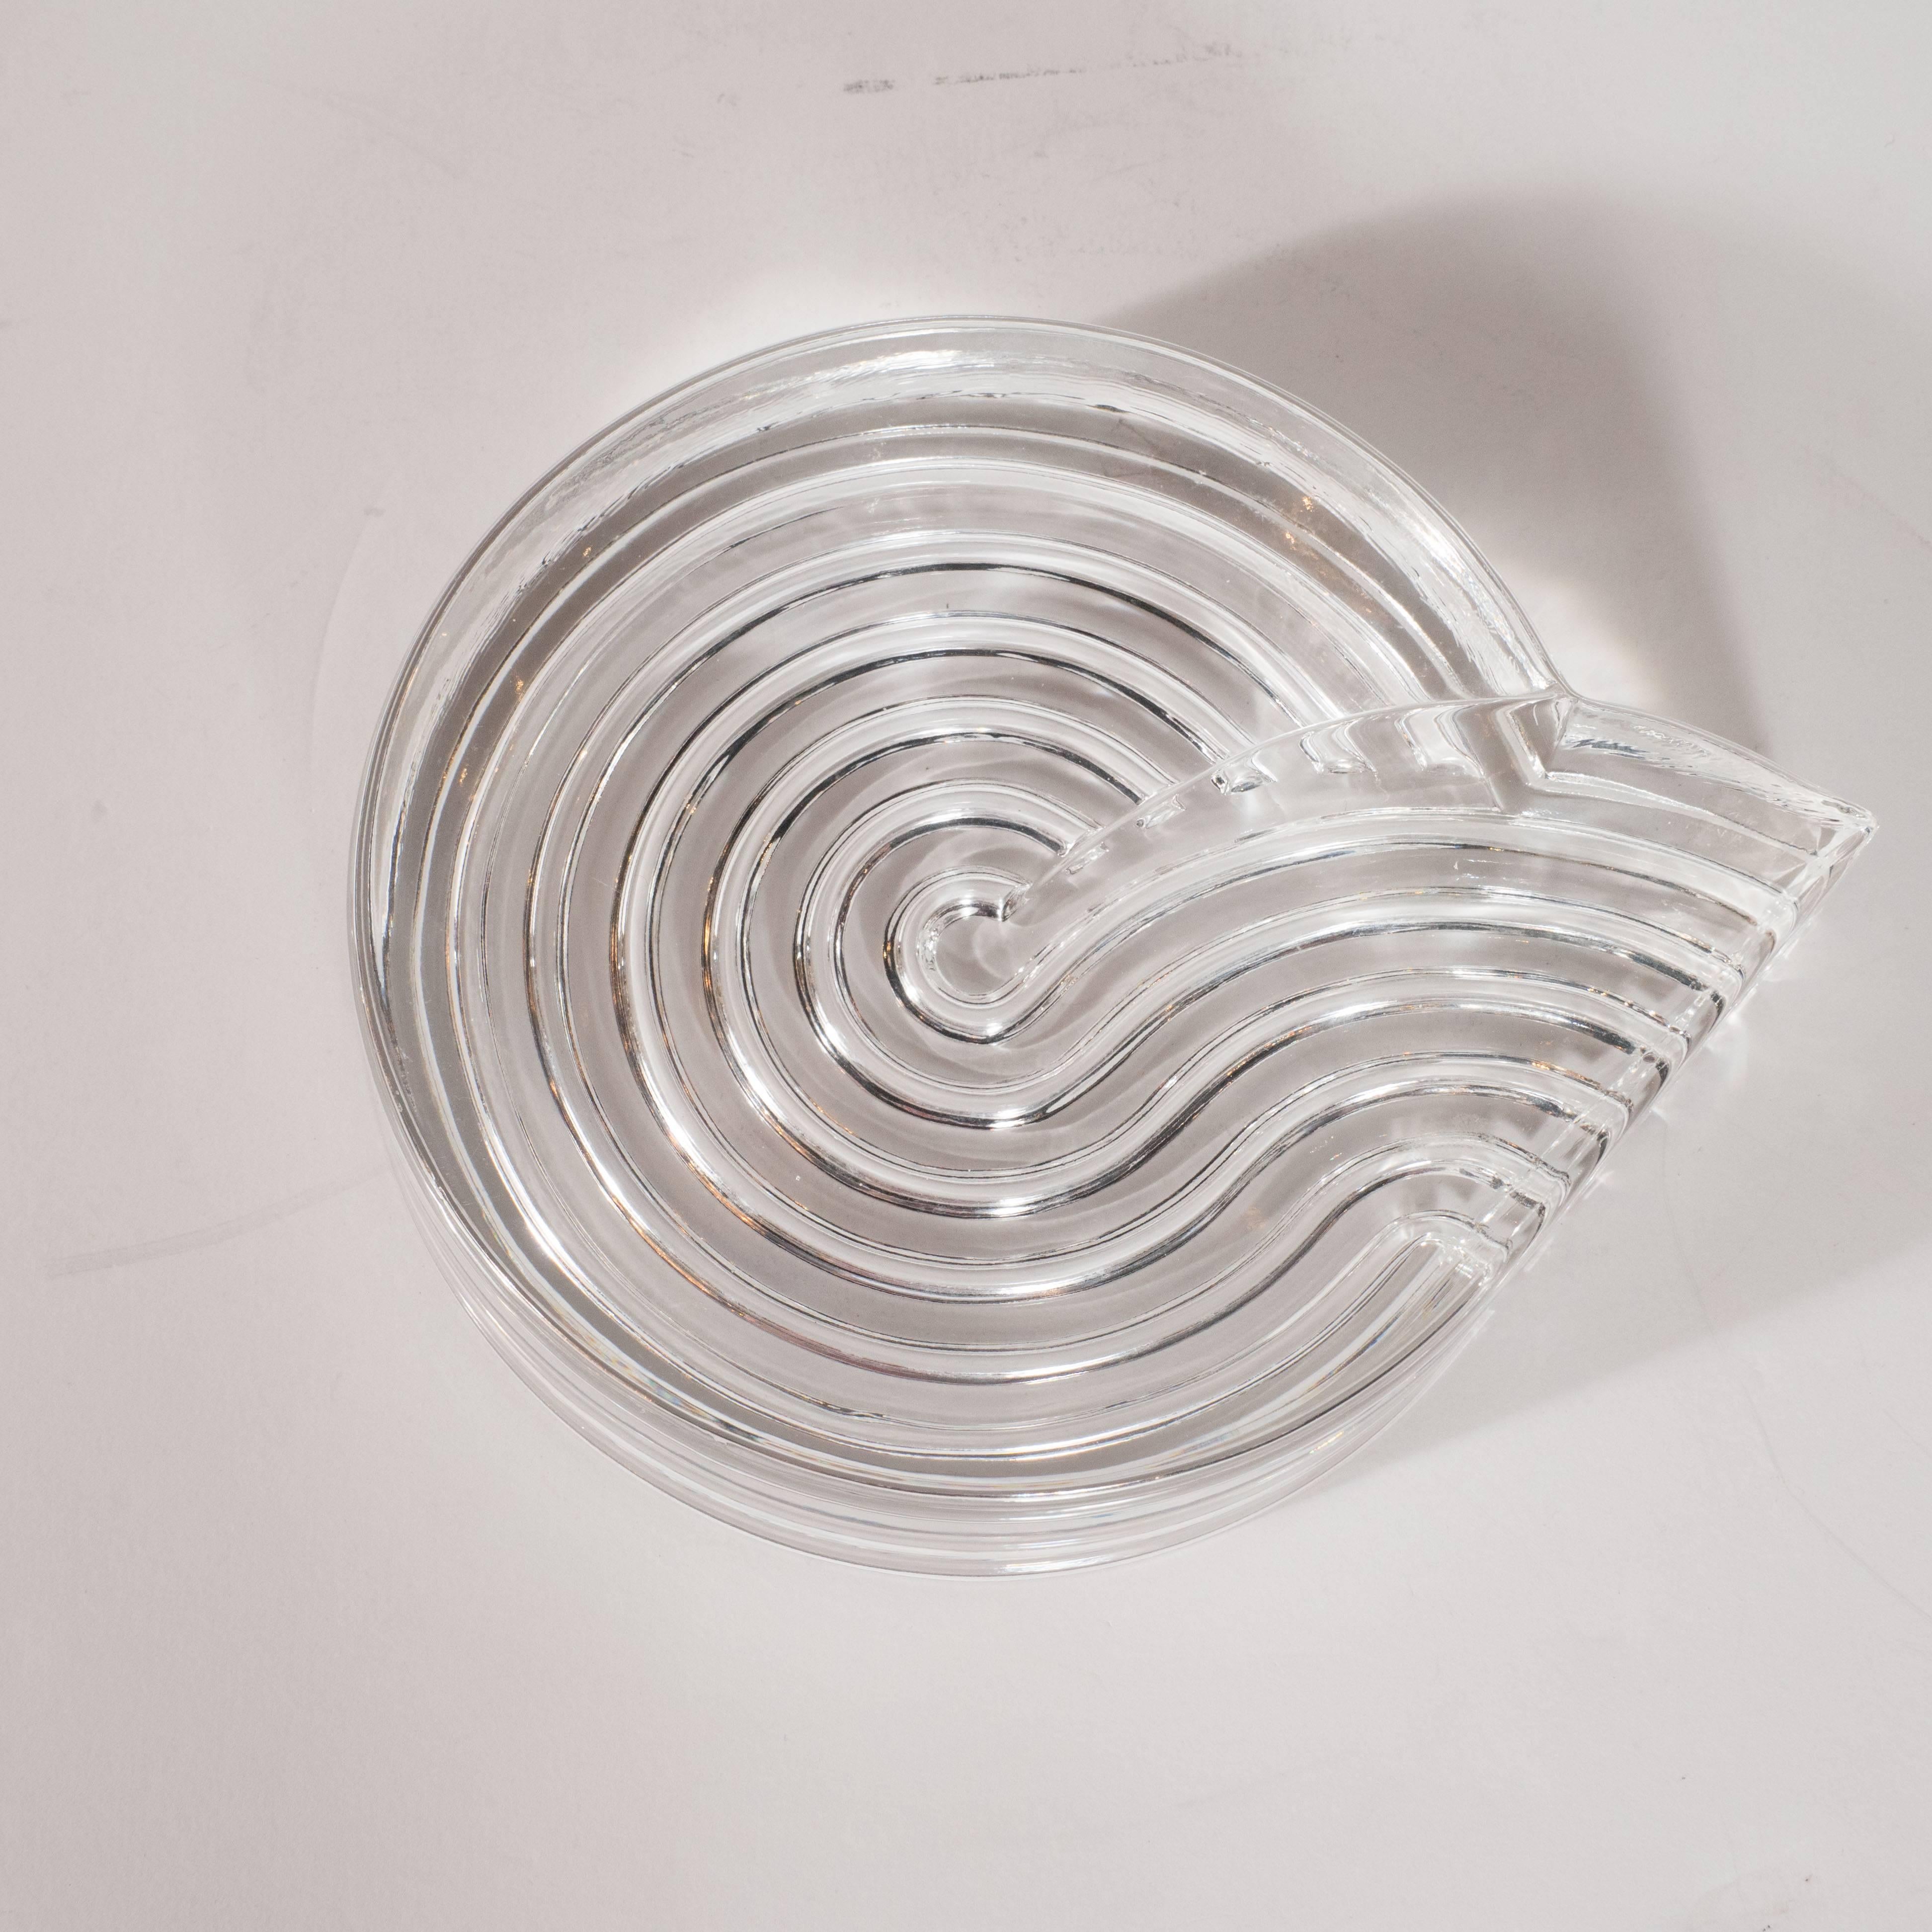 This stunning piece was created by Natale Sapone for Rosenthal- the esteemed German glass studio, circa 1980. Realized in an Art Deco revival aesthetic, this ashtray/side dish features a whirlpool form, consisting of various channels etched on the